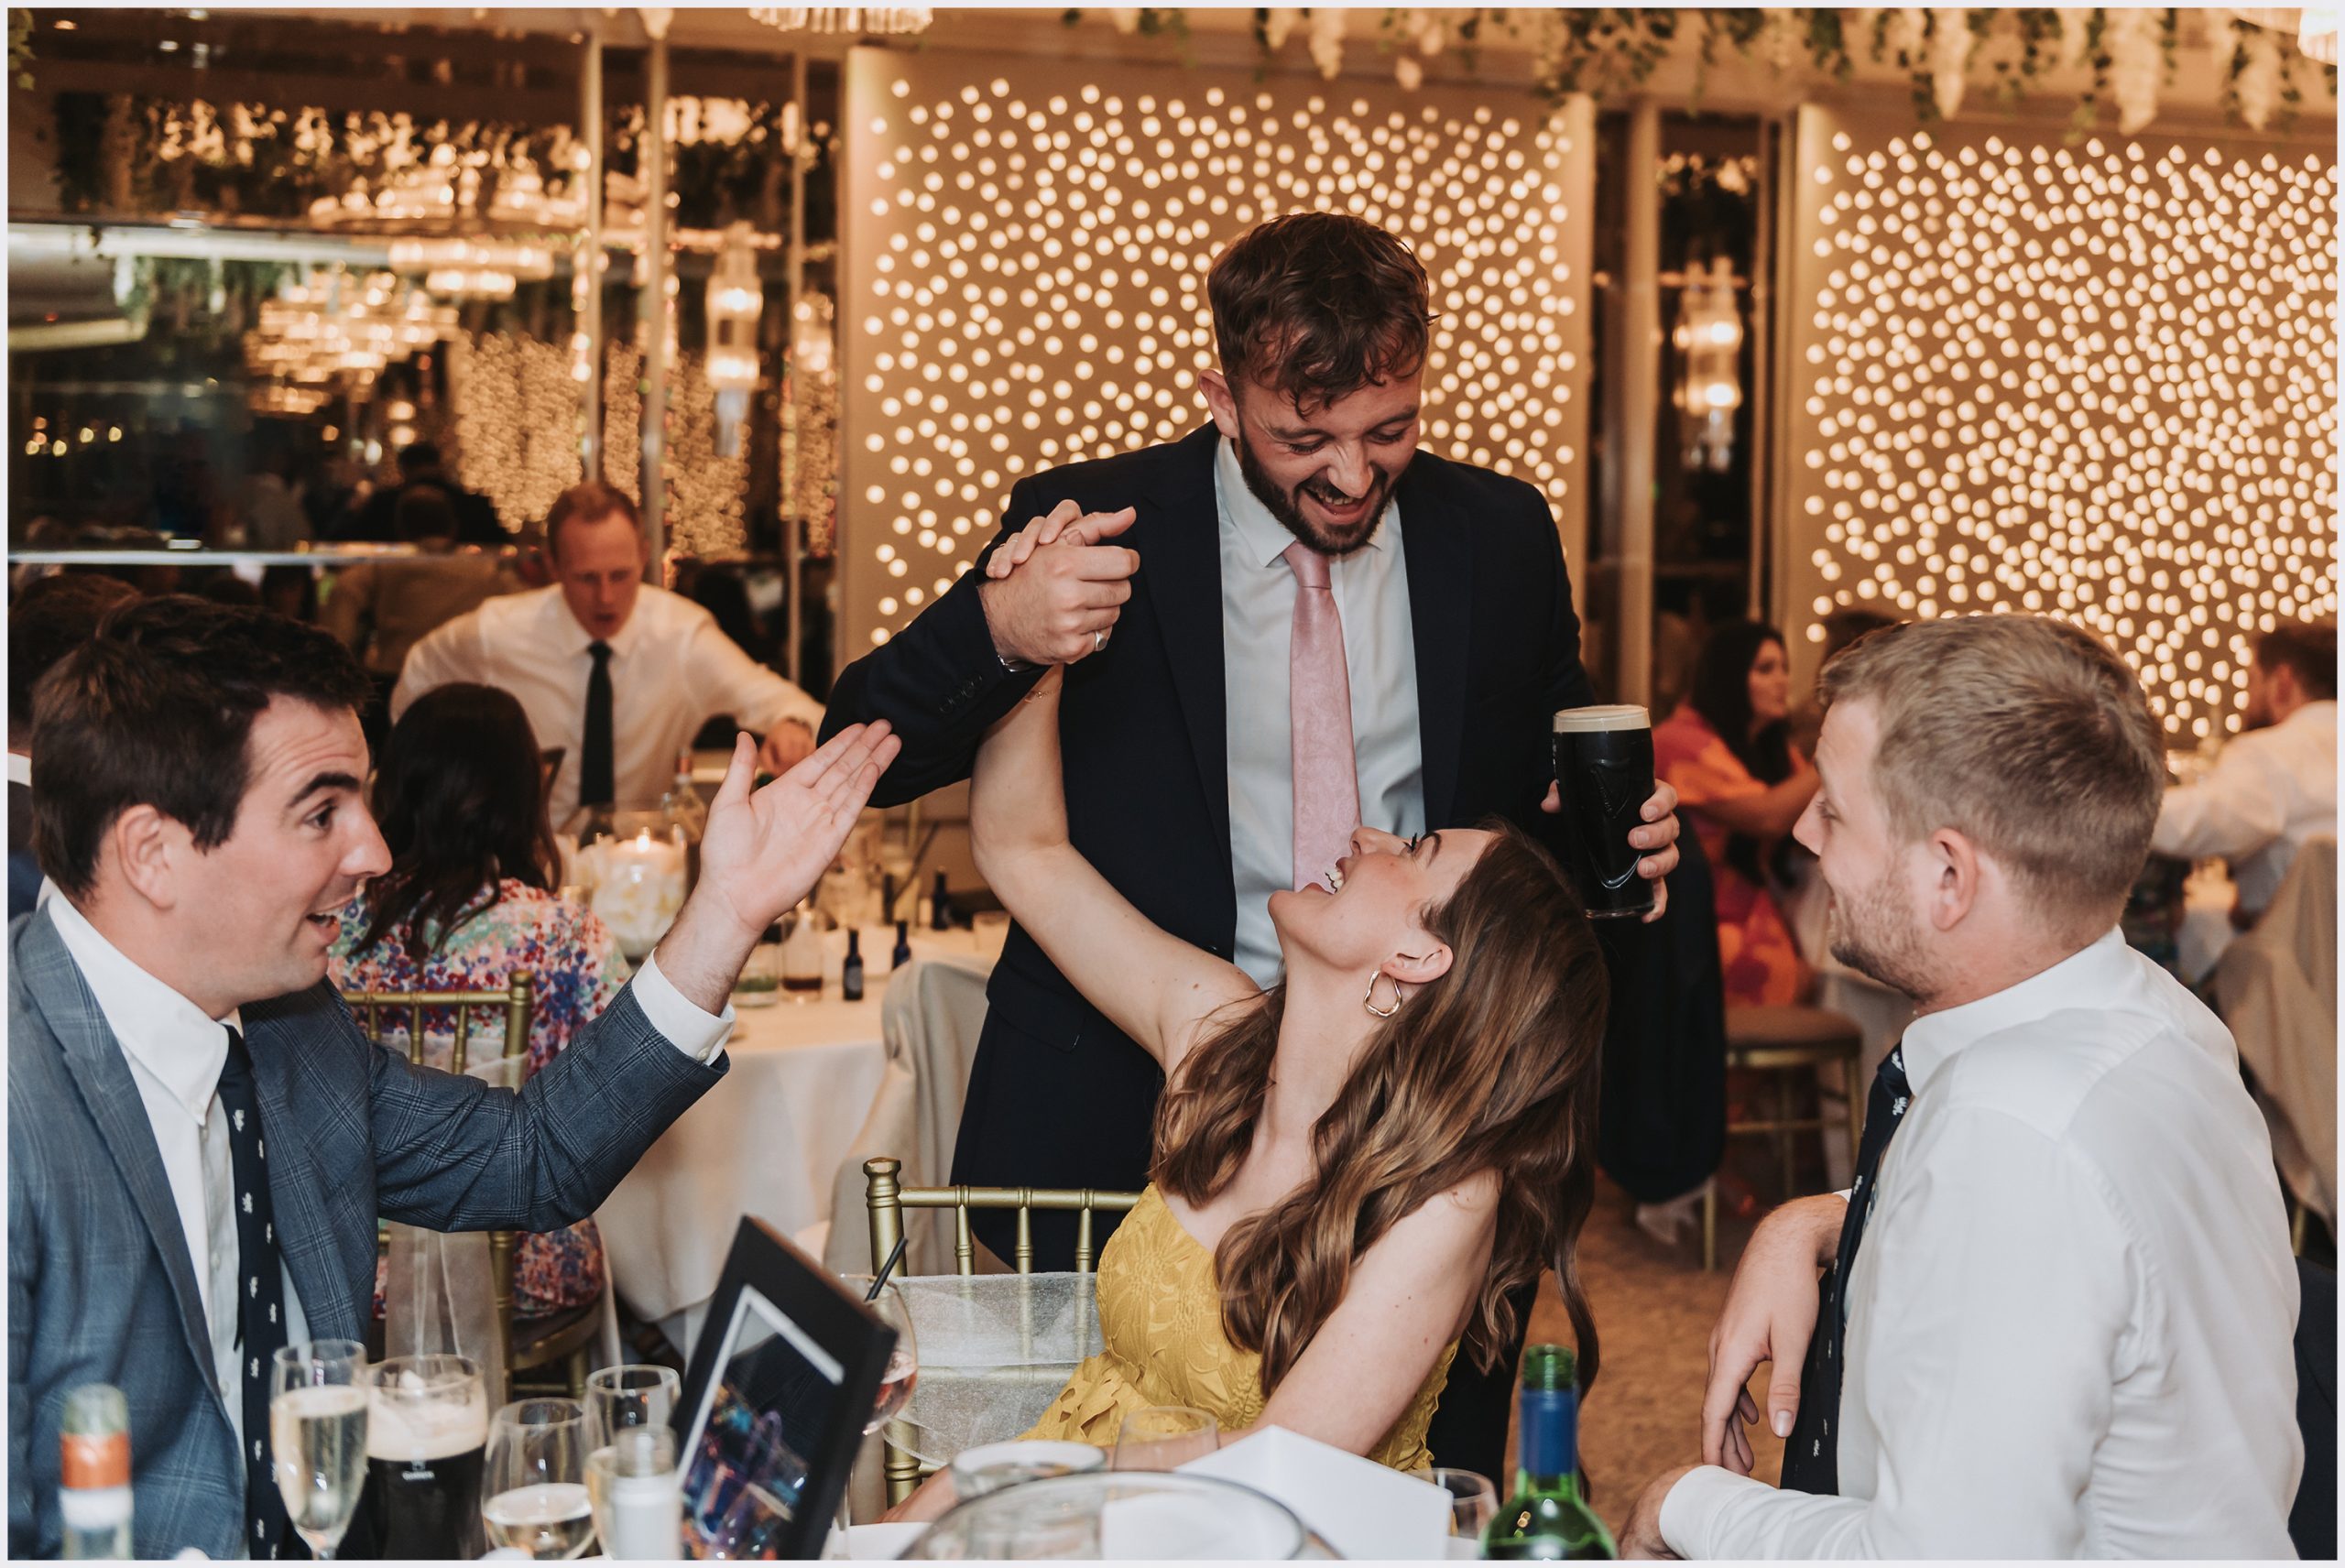 Guests joke and laugh during the wedding reception at The Grosvenor Pulford Hotel and Spa